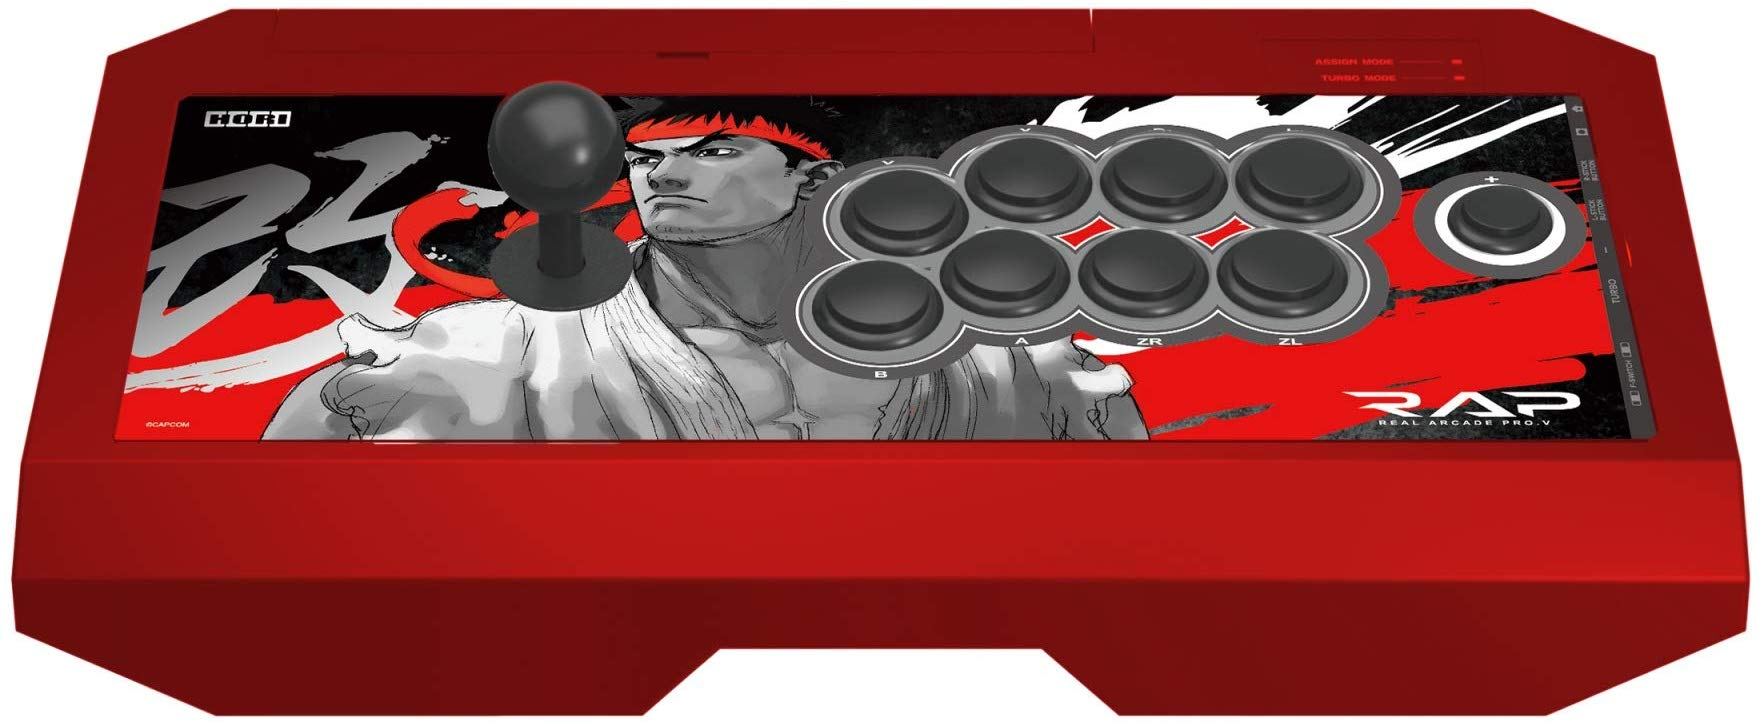 Street Fighter 5 Arcade Edition for Nintendo Switch